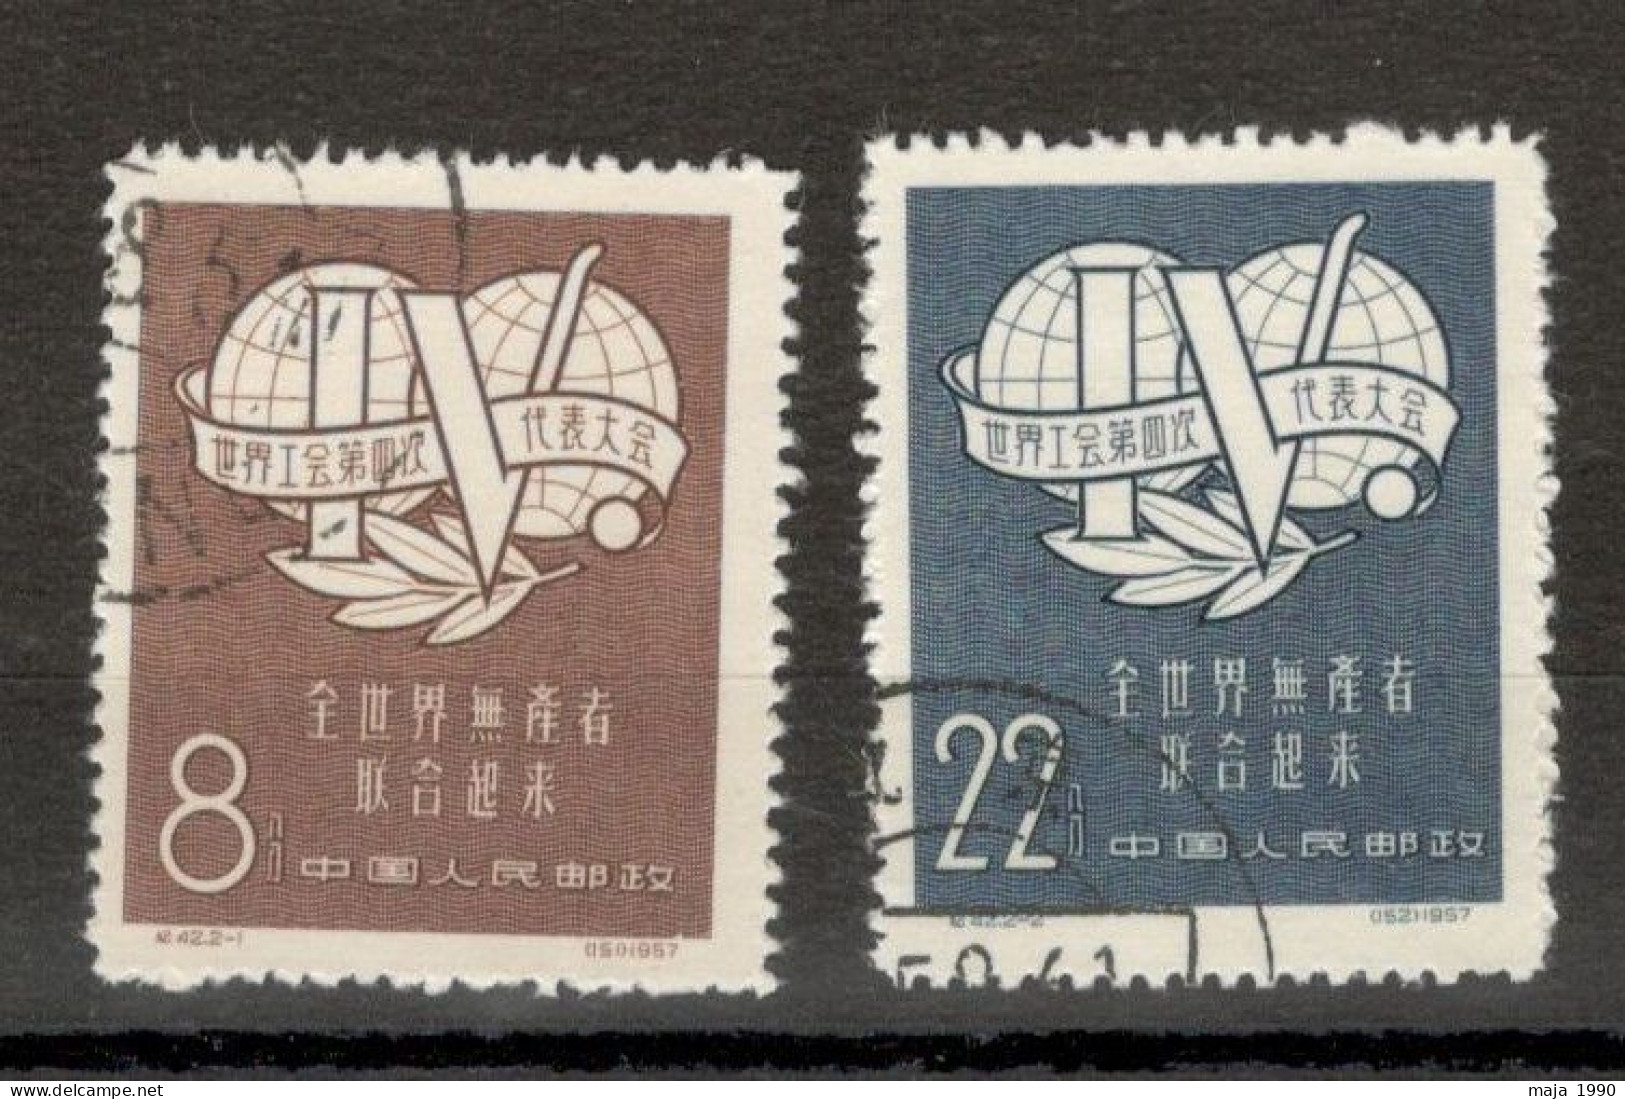 CHINA - USED SET - FOURTH WORLD TRADE UNIONS CONGRESS, LAIPZIG - 1957. - Used Stamps